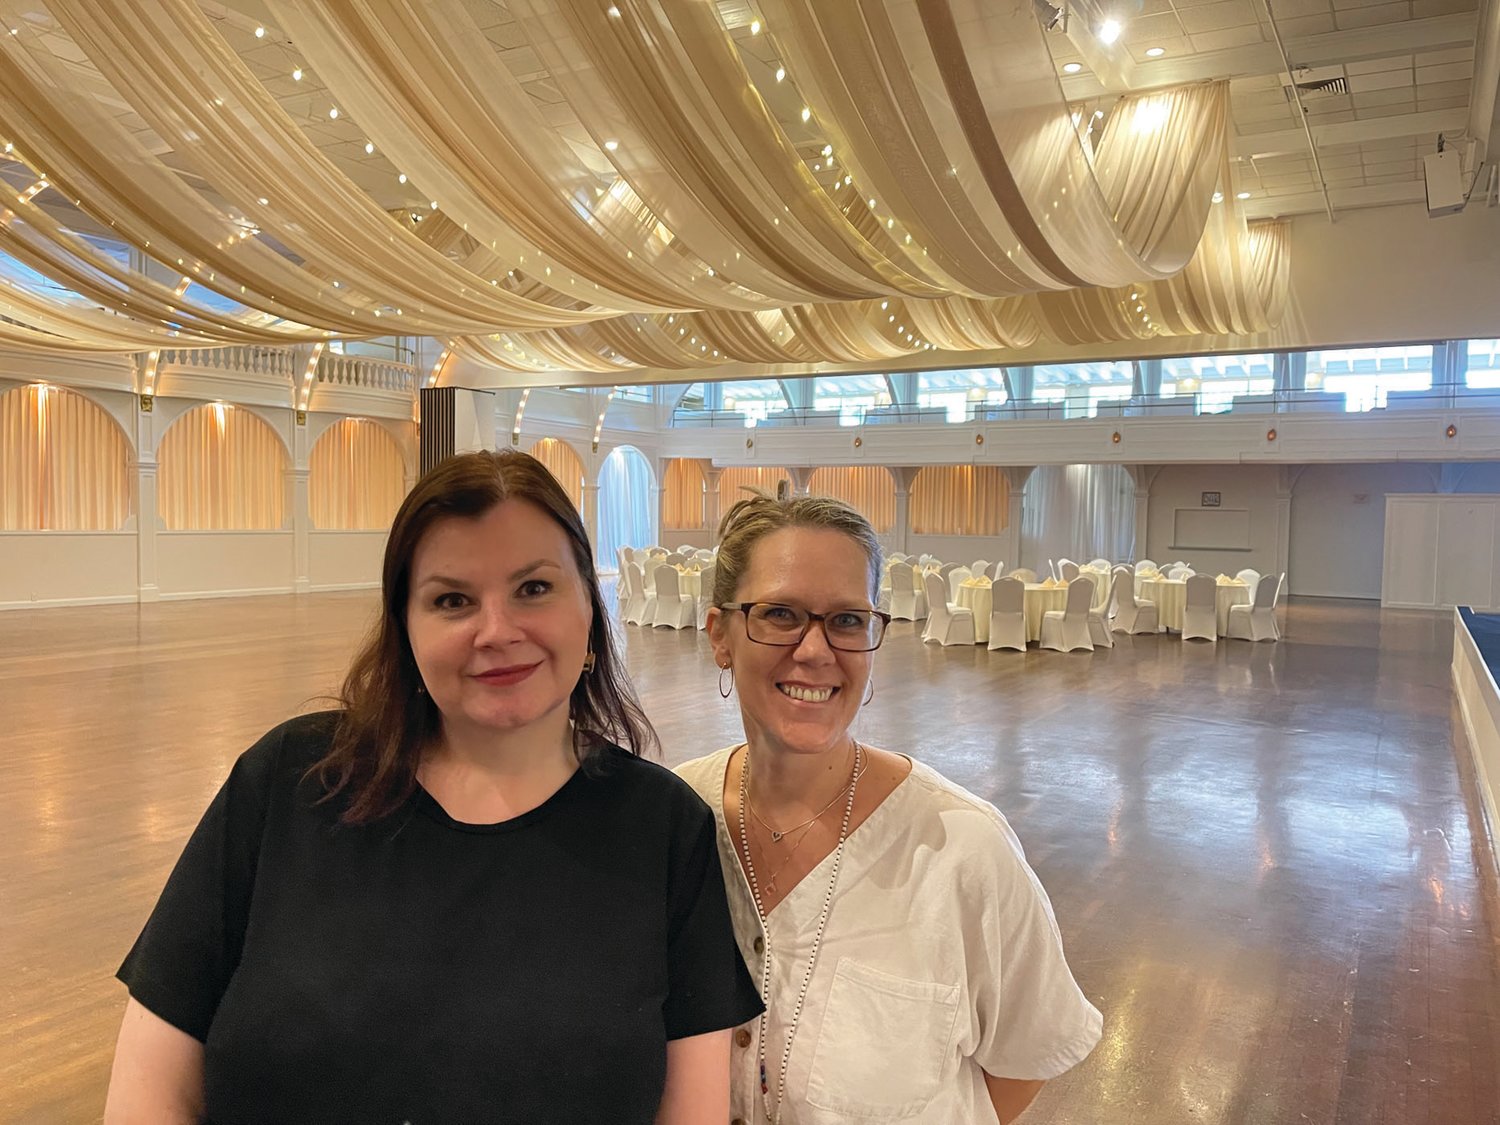 ‘LABOR OF LOVE’: General manager Hillary Williamson, left, and sales manager Jennifer Wheland began their work at Rhodes on the Pawtuxet last June before officially starting in their current roles in September. Wheland, who previously worked with Williamson at the Imperial Room, said their efforts to revitalize Rhodes have been “an absolute labor of love.”